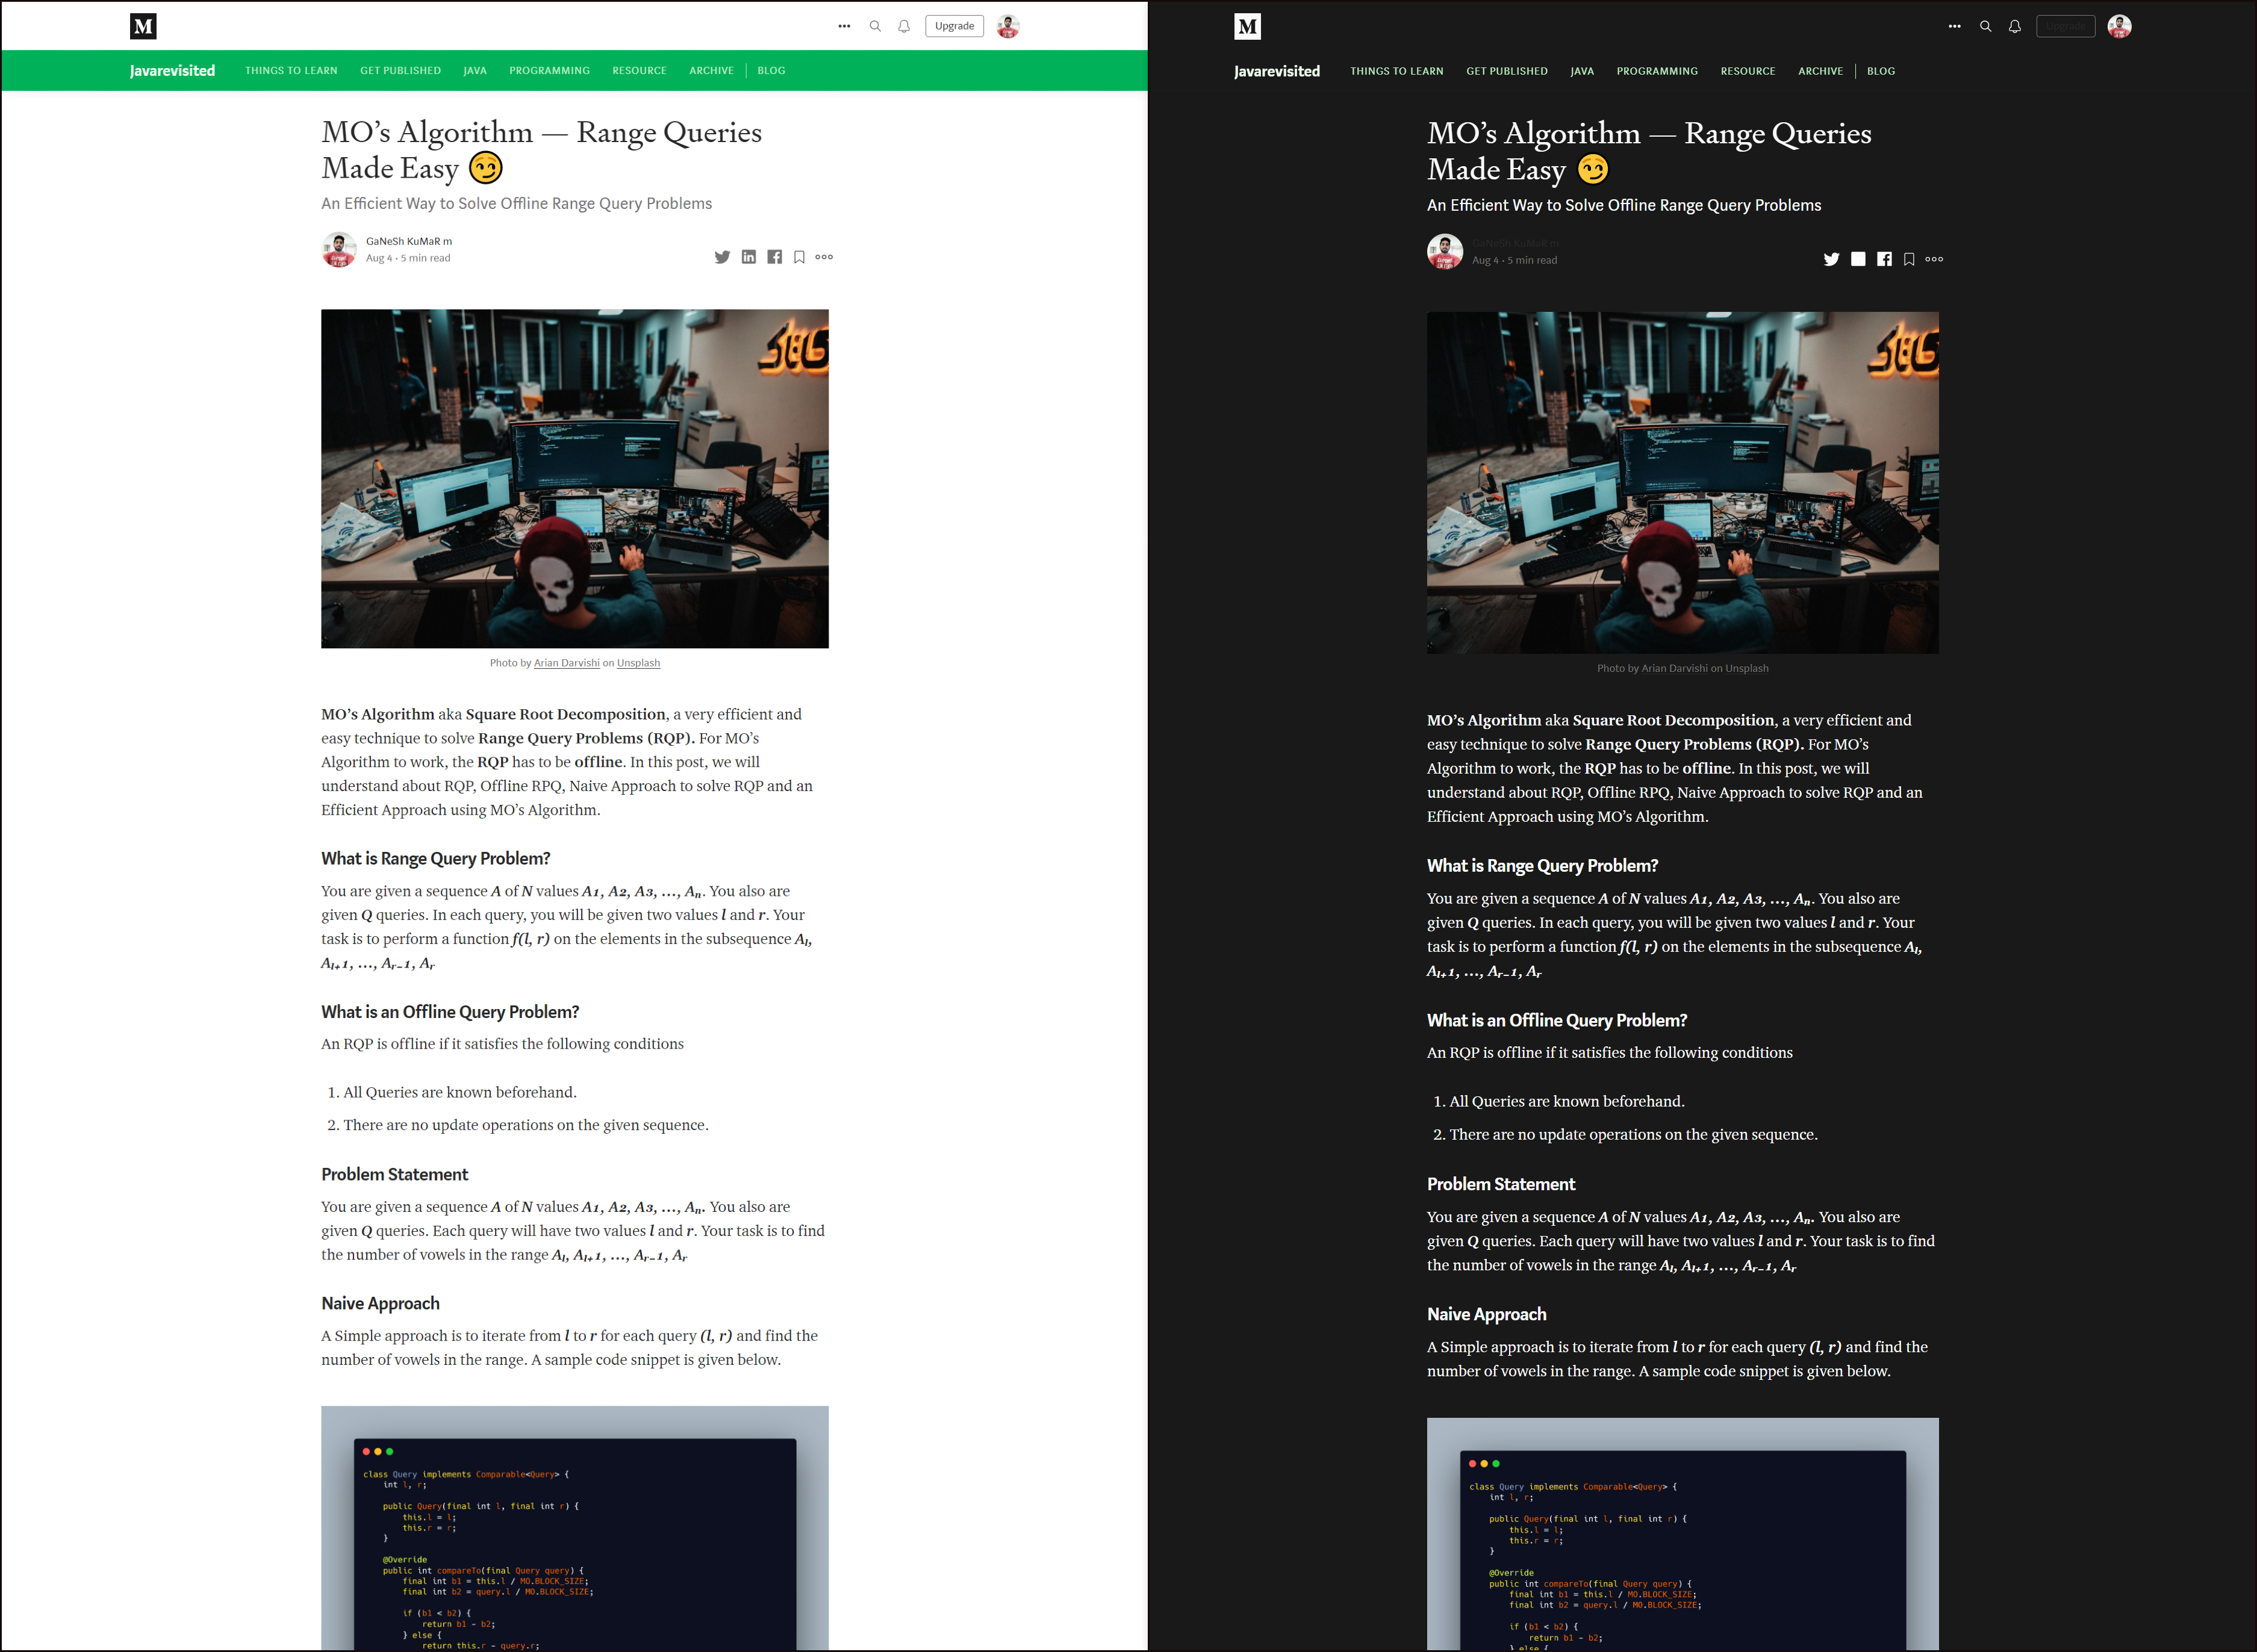 My [article ](https://cdn.hashnode.com/res/hashnode/image/upload/v1618227642067/a6fnaCQSd.html)with and without Dark Theme